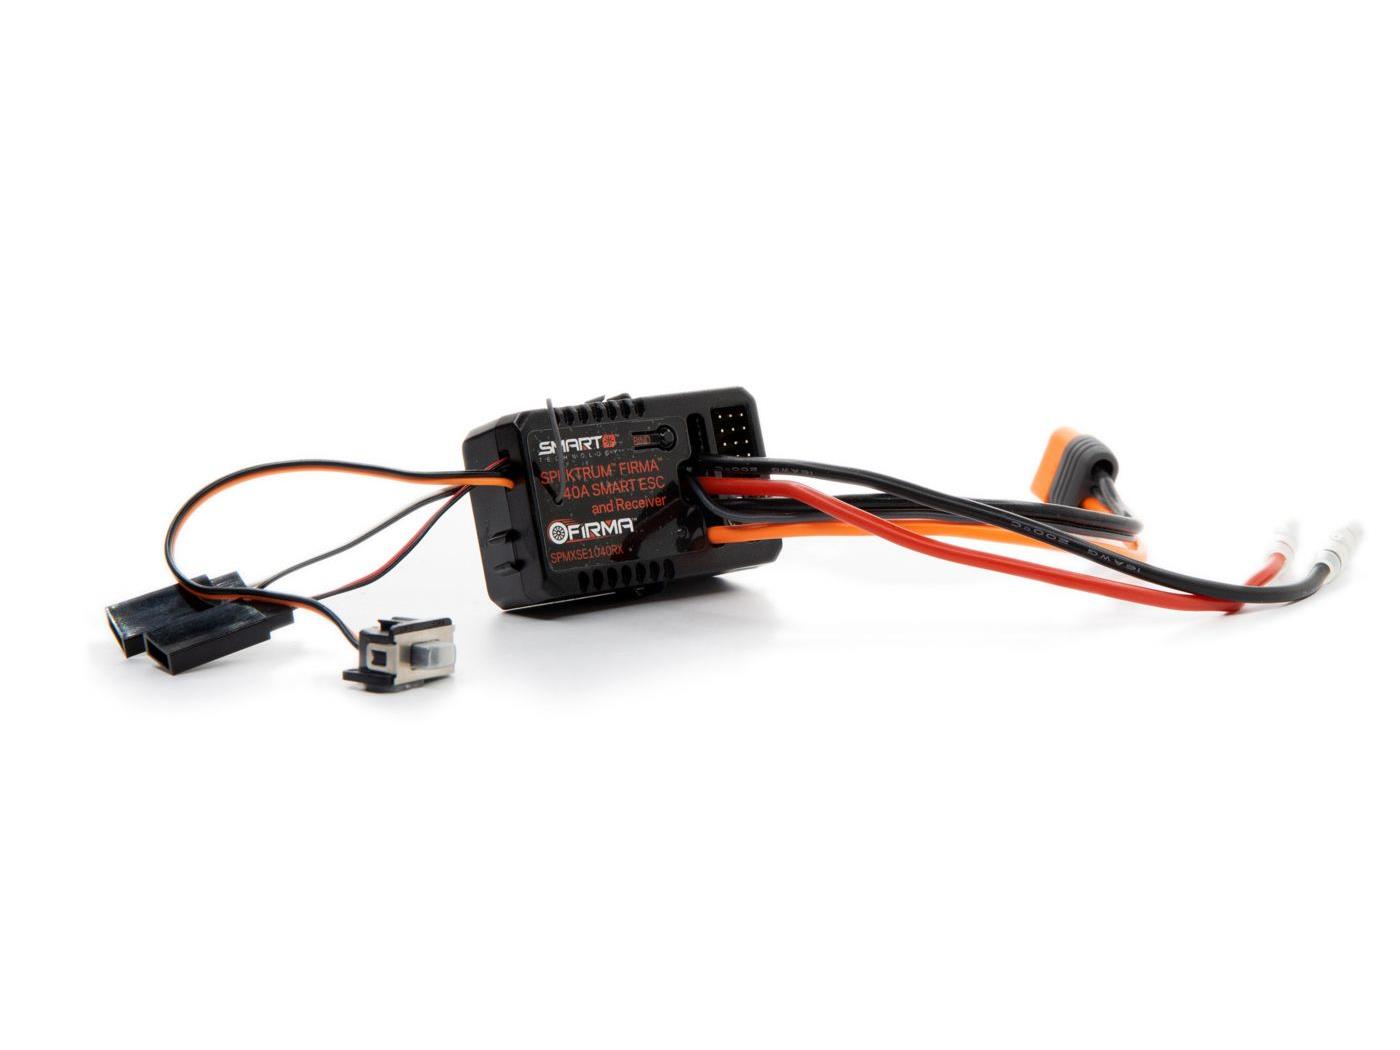 Spektrum Firma 40 Amp Brushed Smart 2-in-1 ESC and Receiver SPMXSE1040RX